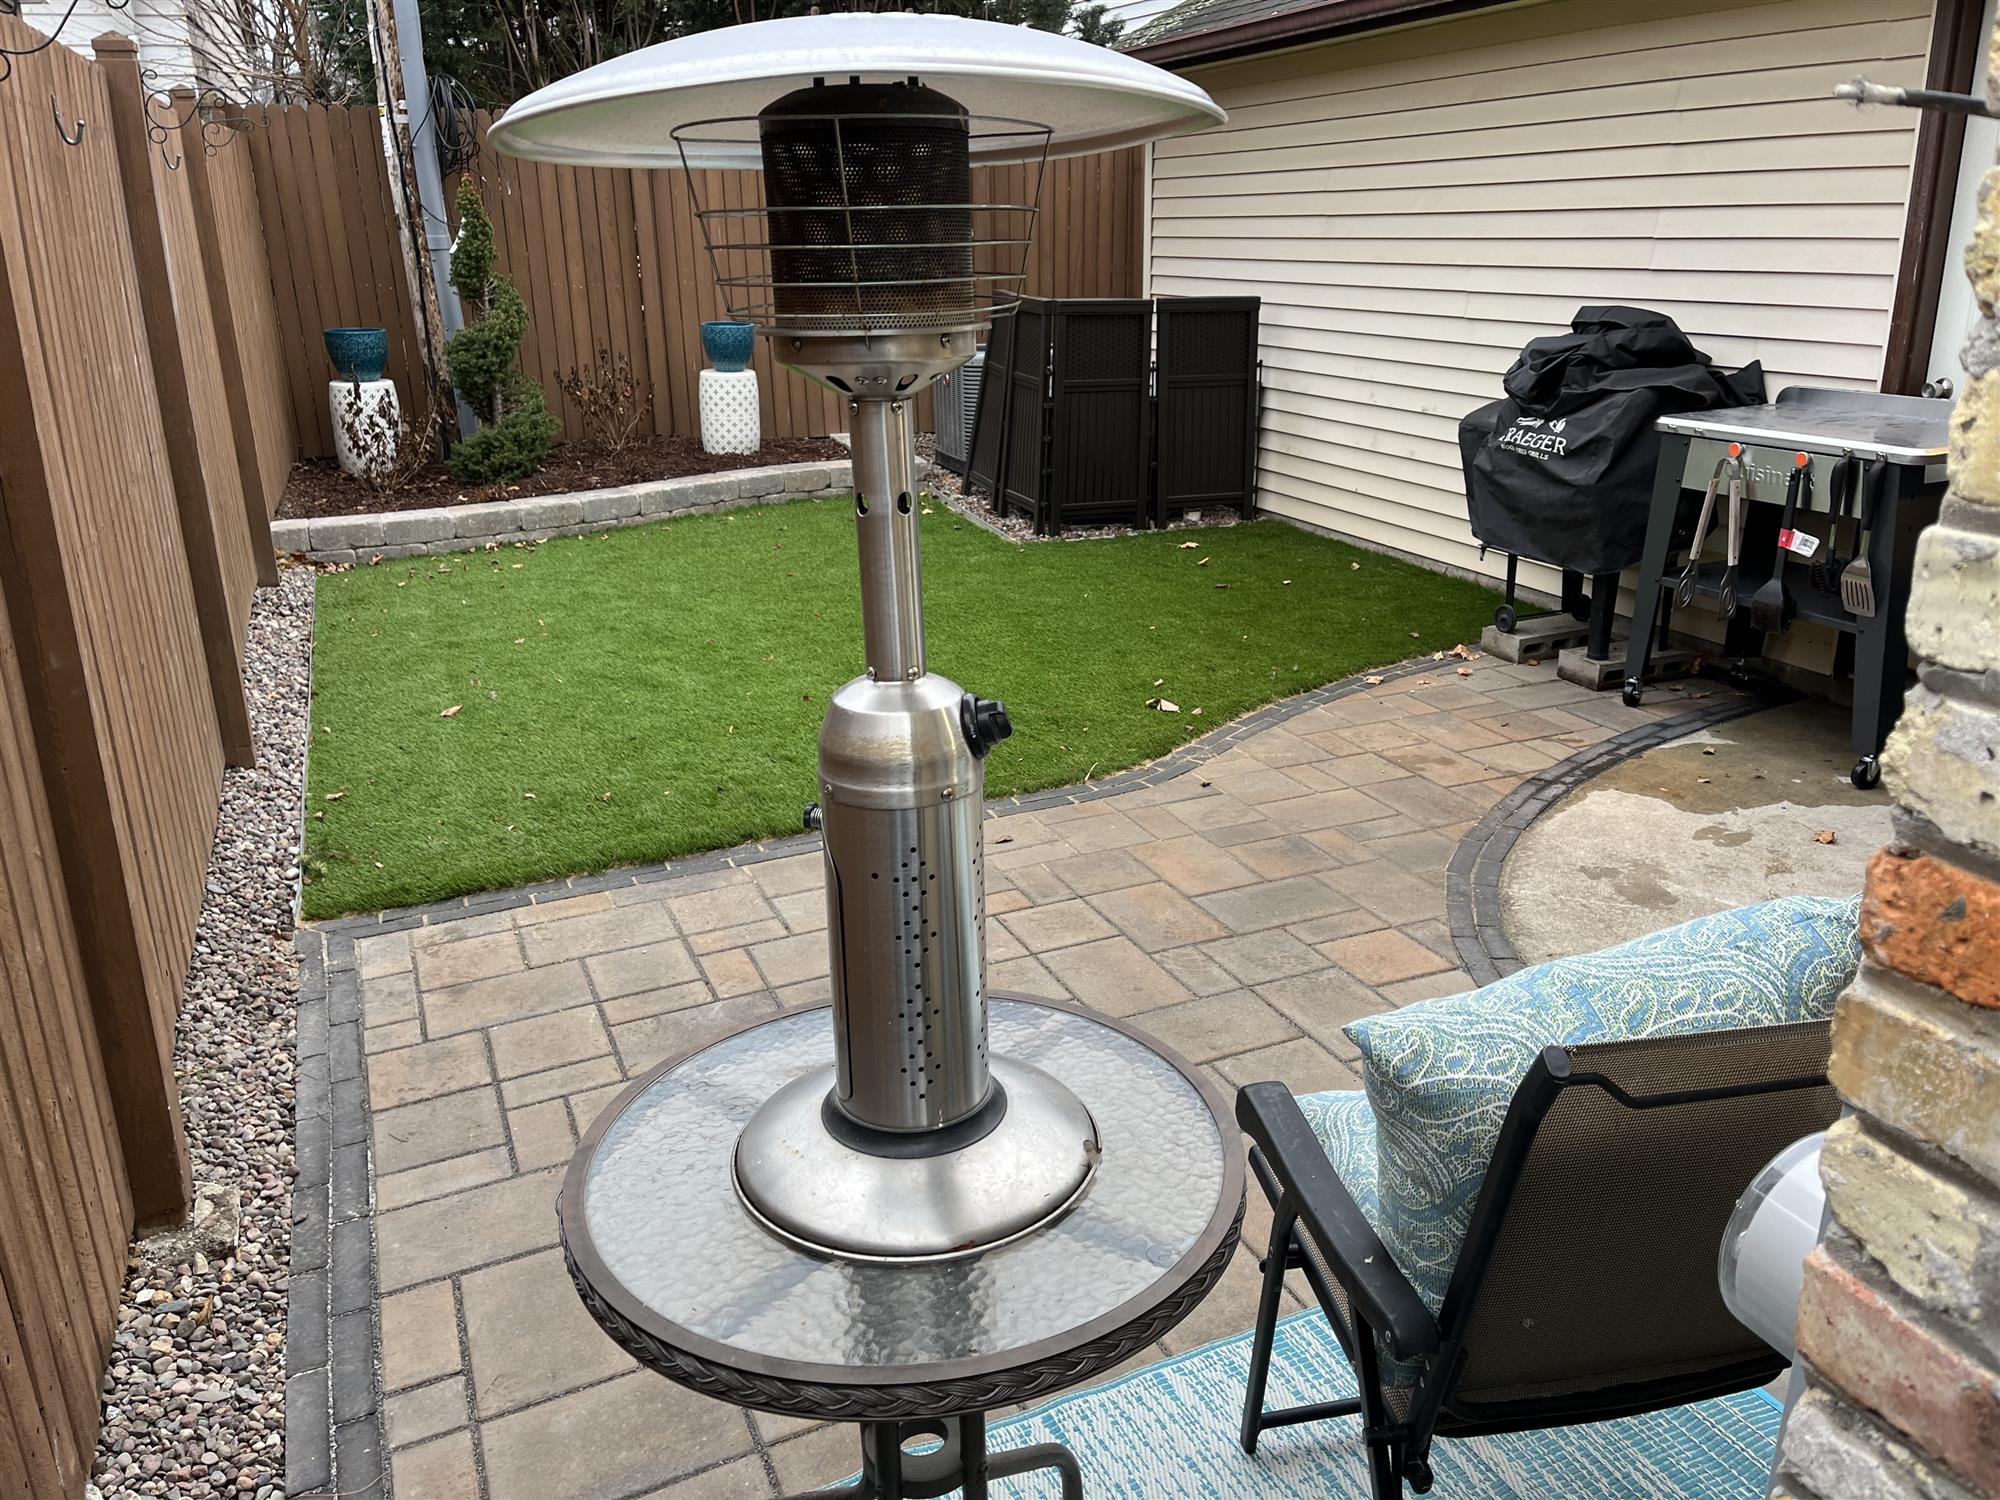 Decorative patio addition with small turf lawn